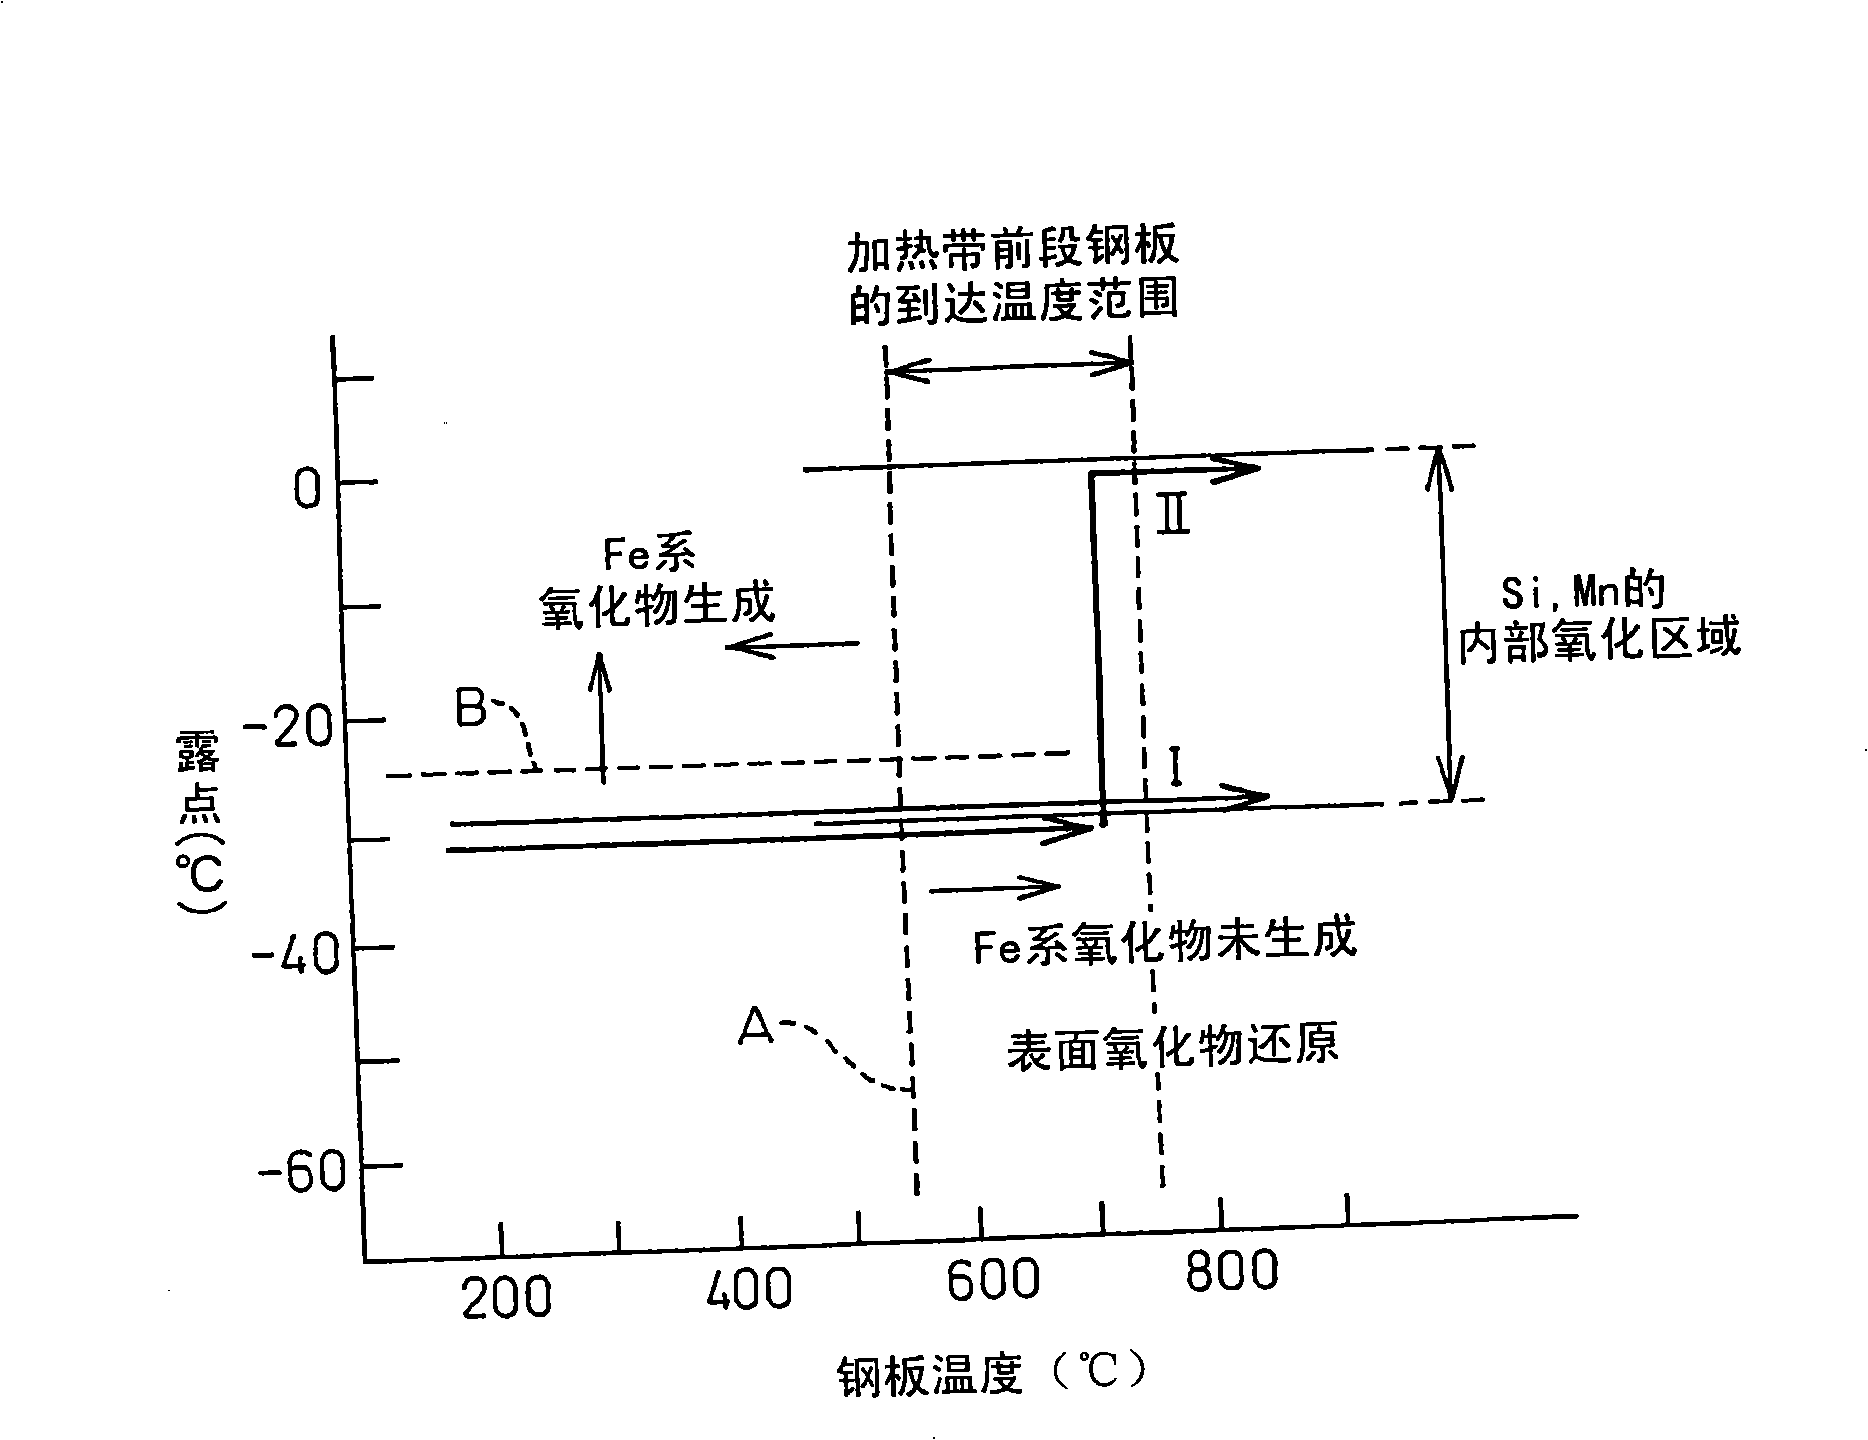 Method of continous annealing/hot-dipping of steel sheet containing silicon and apparatus for continuous annealing/hot-dipping